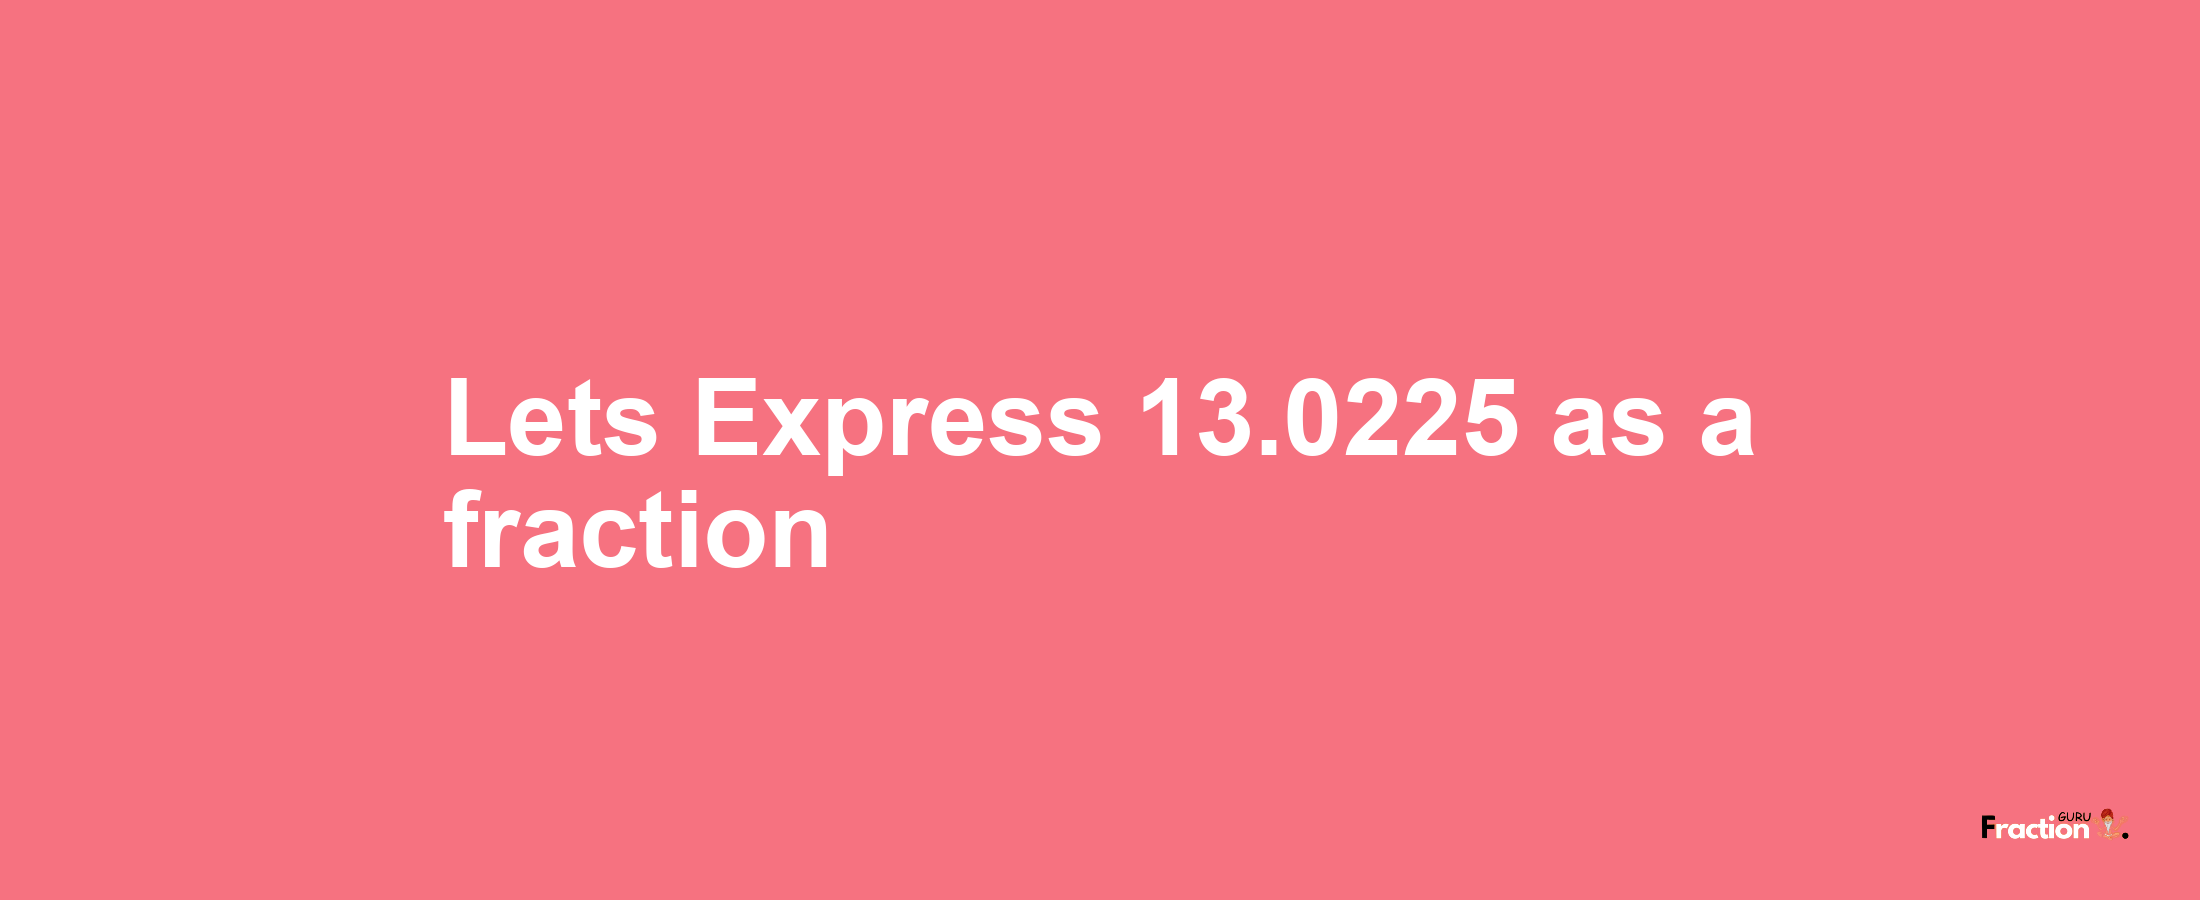 Lets Express 13.0225 as afraction